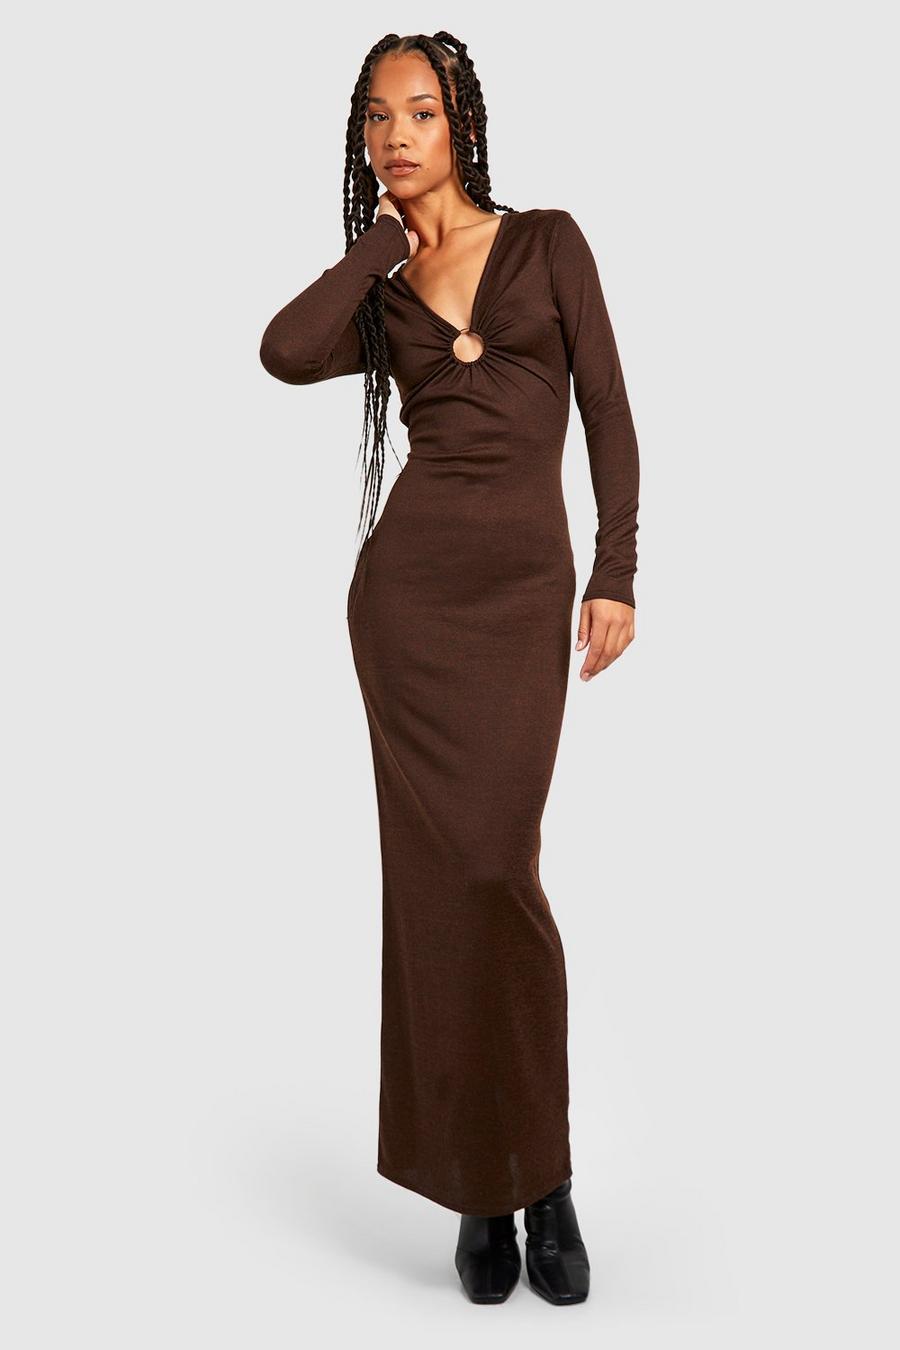 Chocolate brown Tall Lightweight Knitted O-ring Maxi Dress